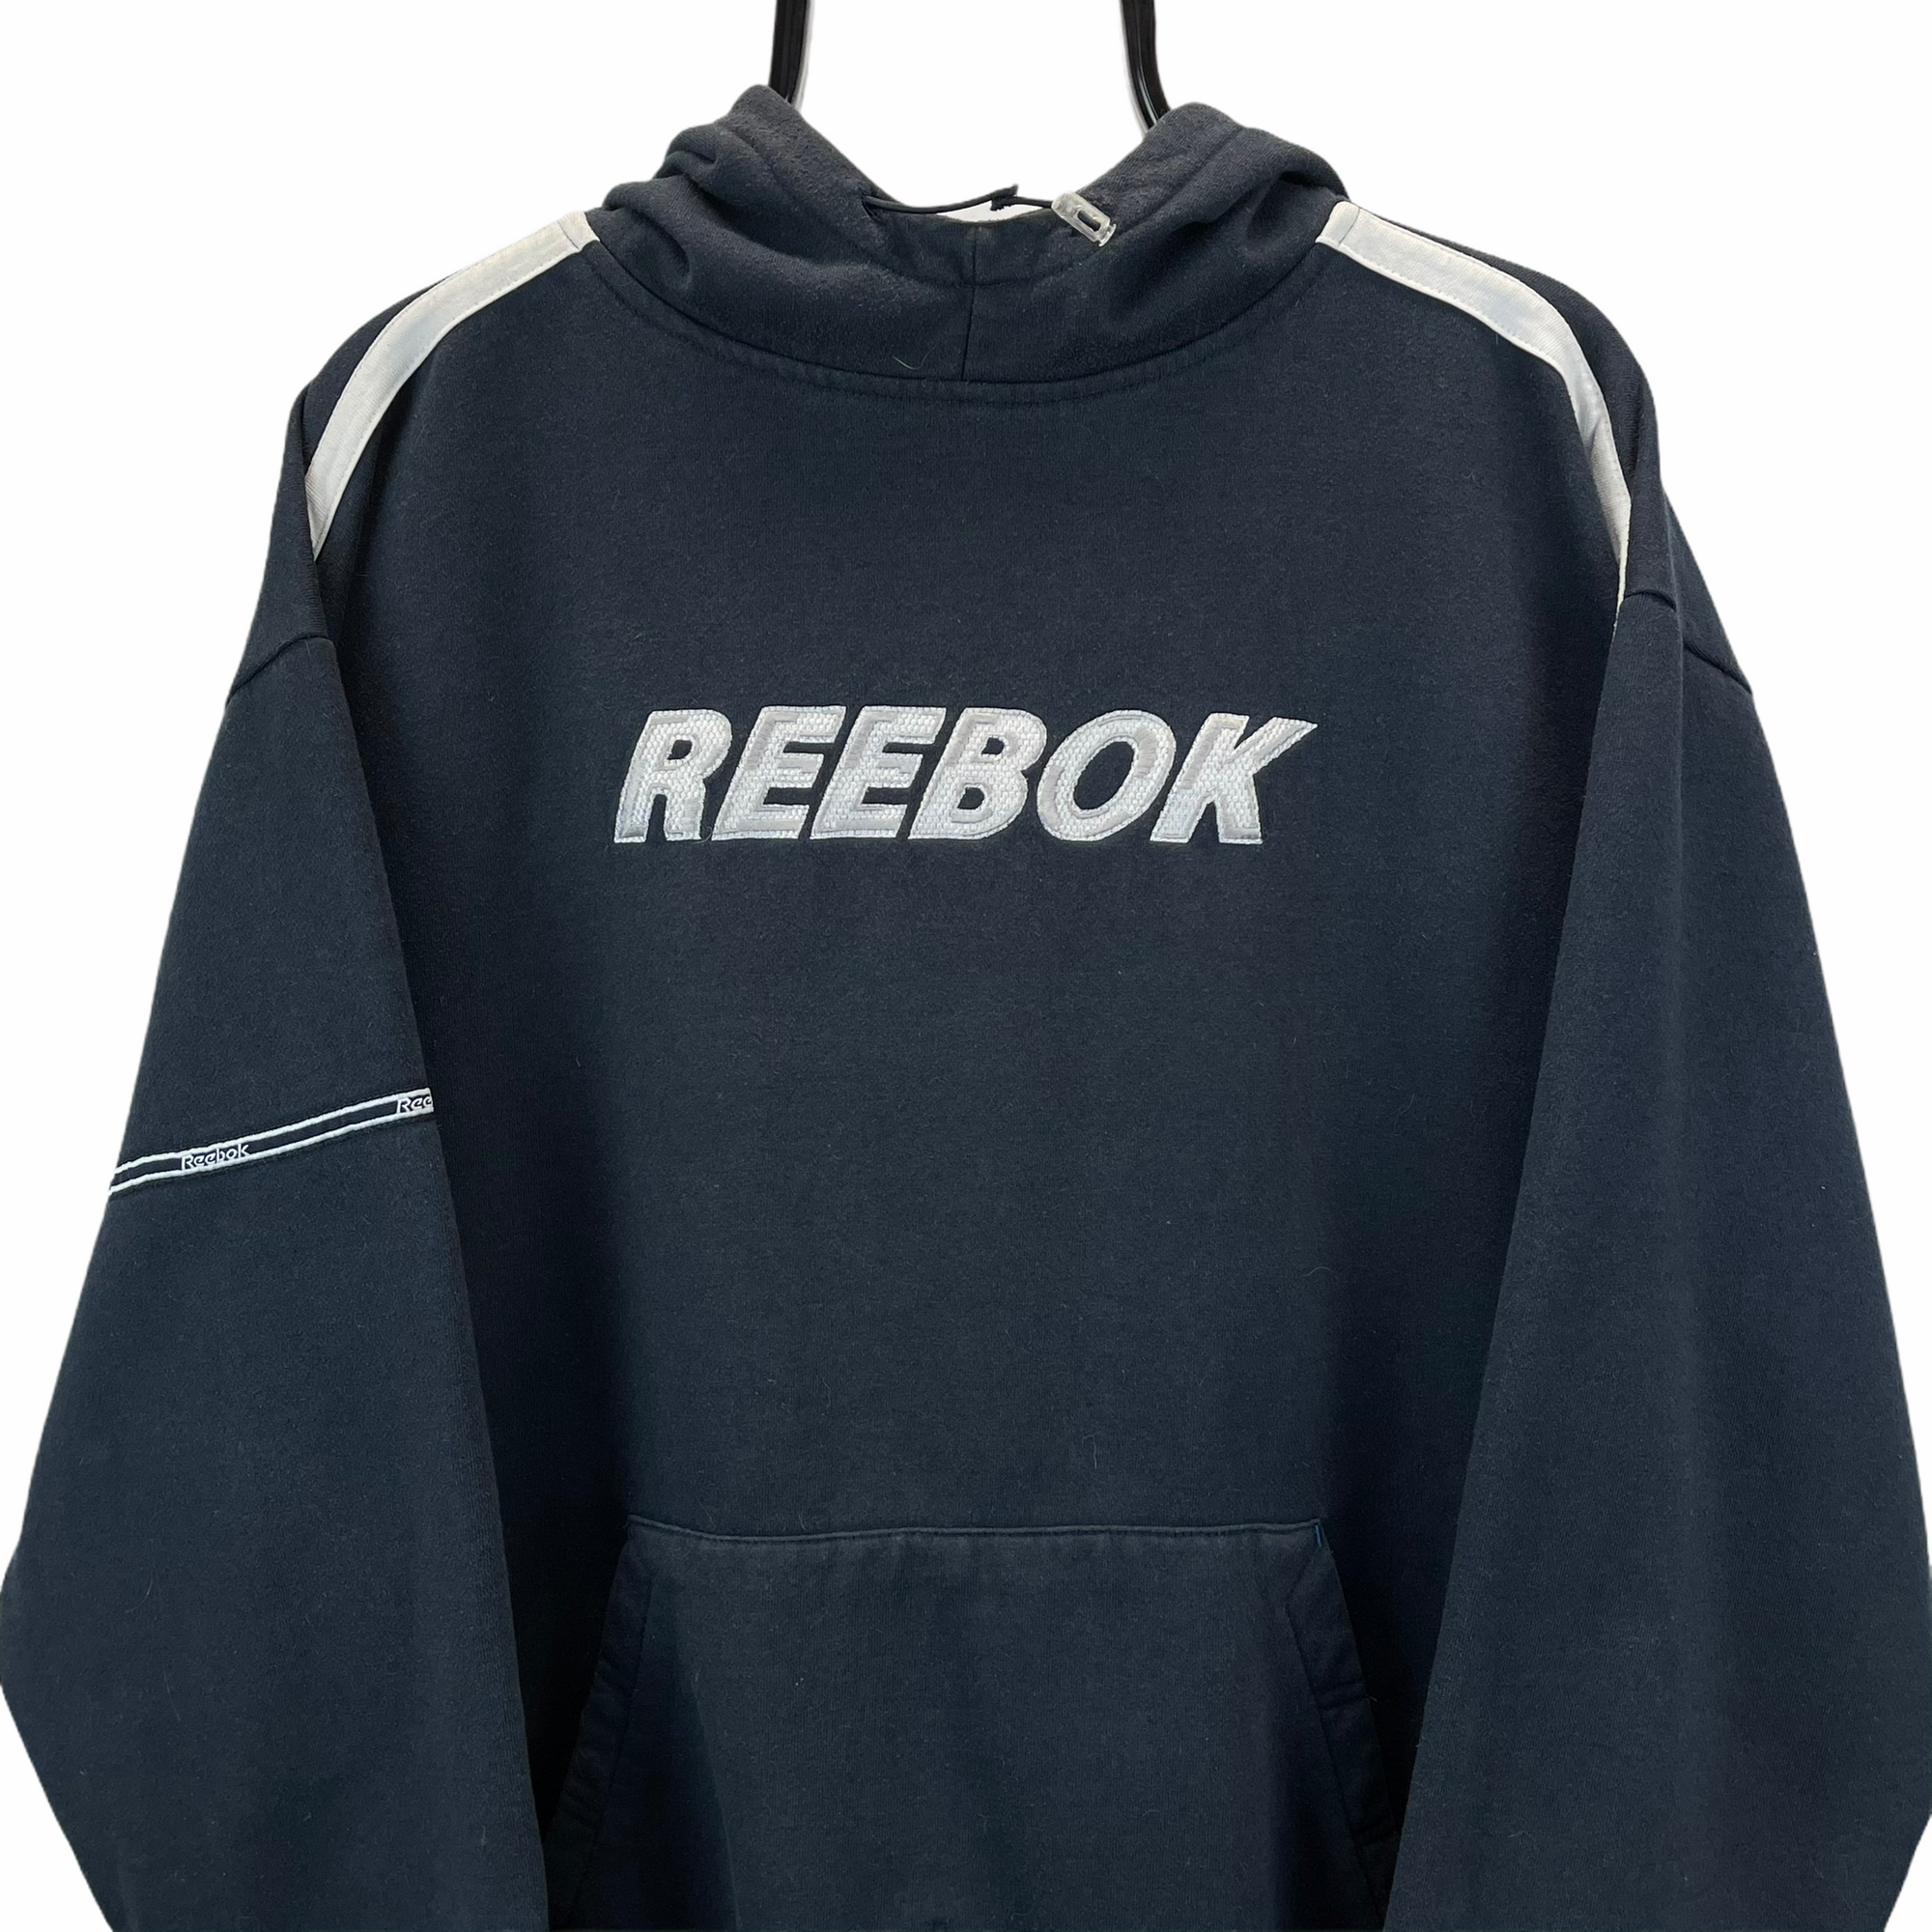 VINTAGE 90S REEBOK SPELLOUT HOODIE IN WASHED BLACK & WHITE - MEN'S LARGE/WOMEN'S XL